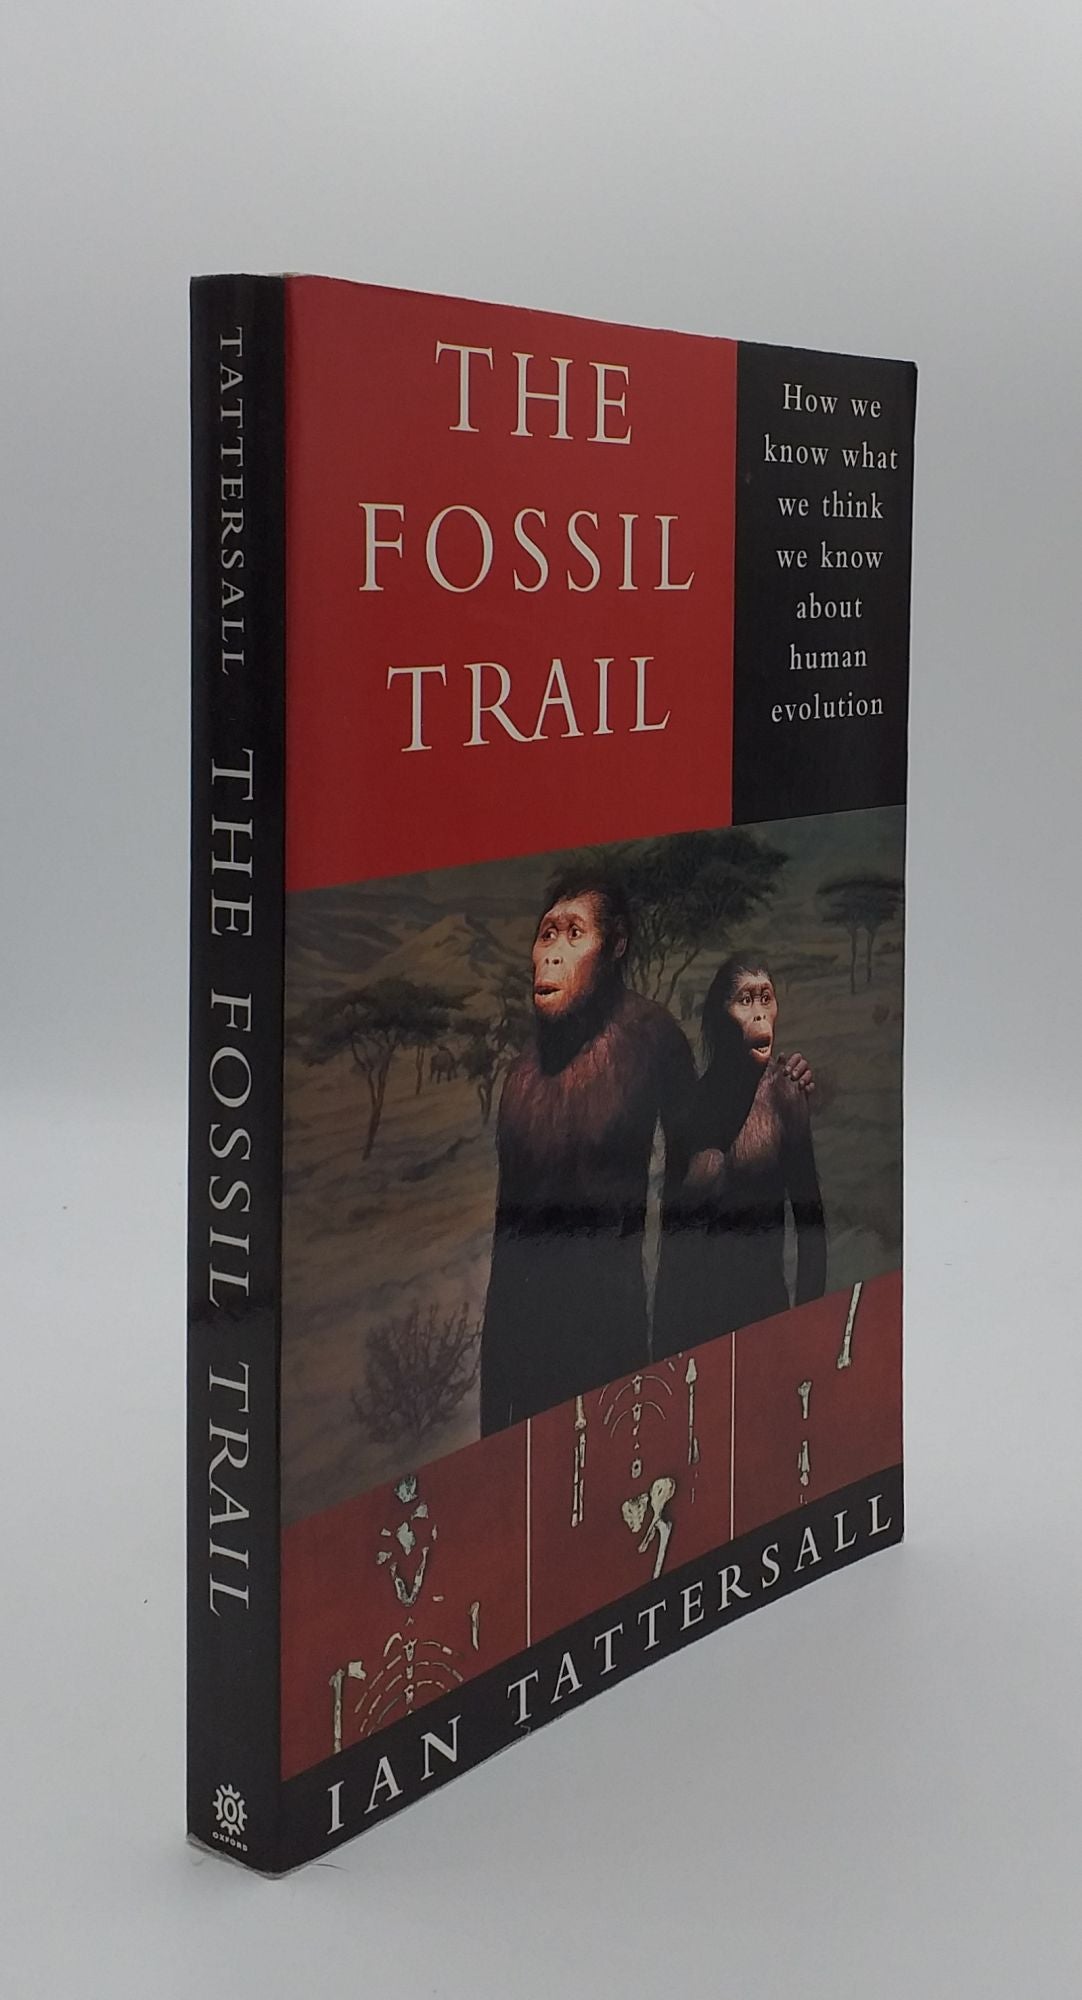 TATTERSALL Ian - The Fossil Trail How We Know What We Think About Human Evolution